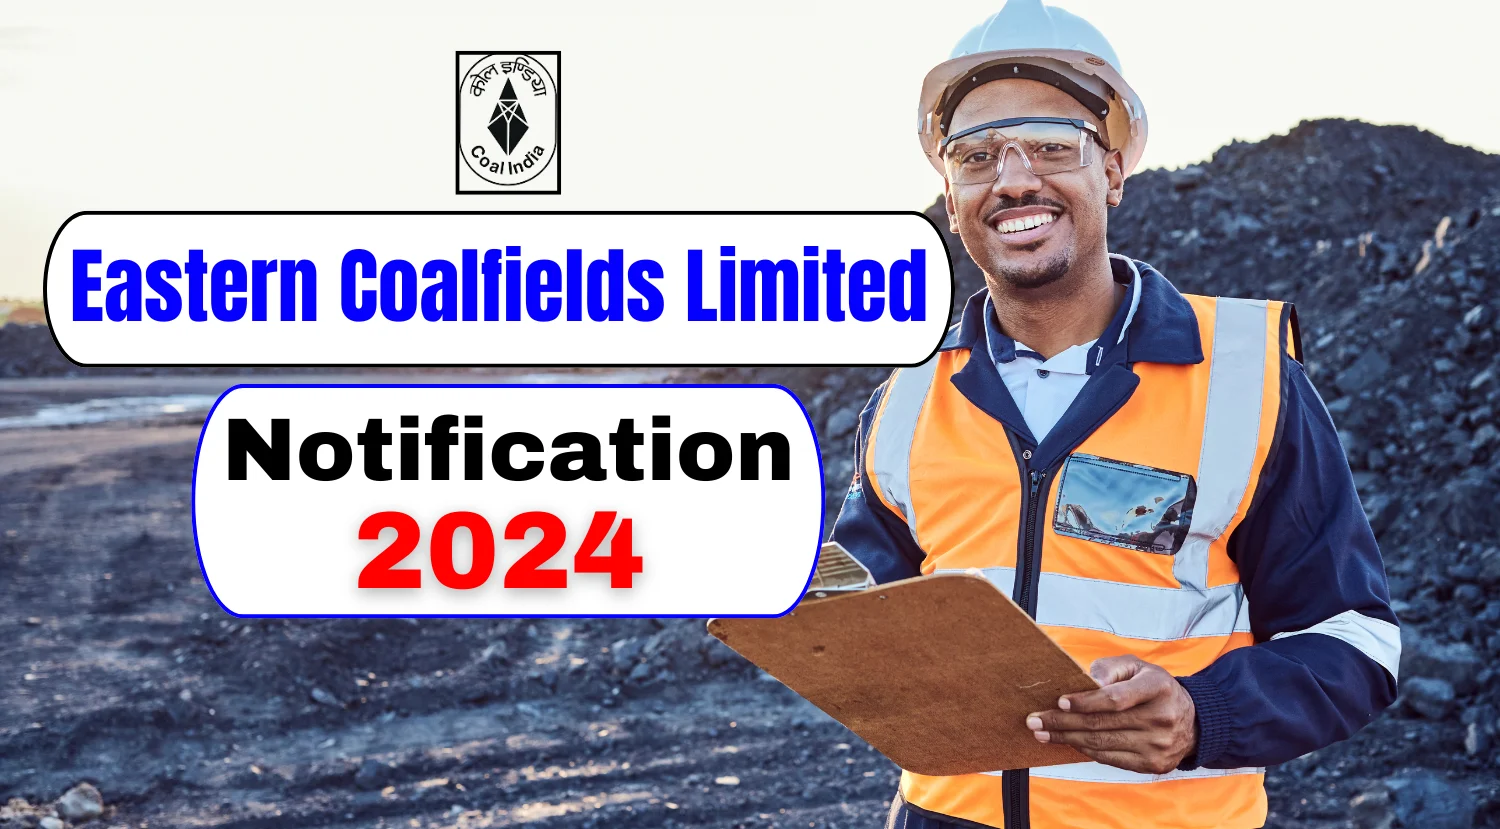 Eastern Coalfields Limited (ECL) Director Technical Recruitment Notification Out